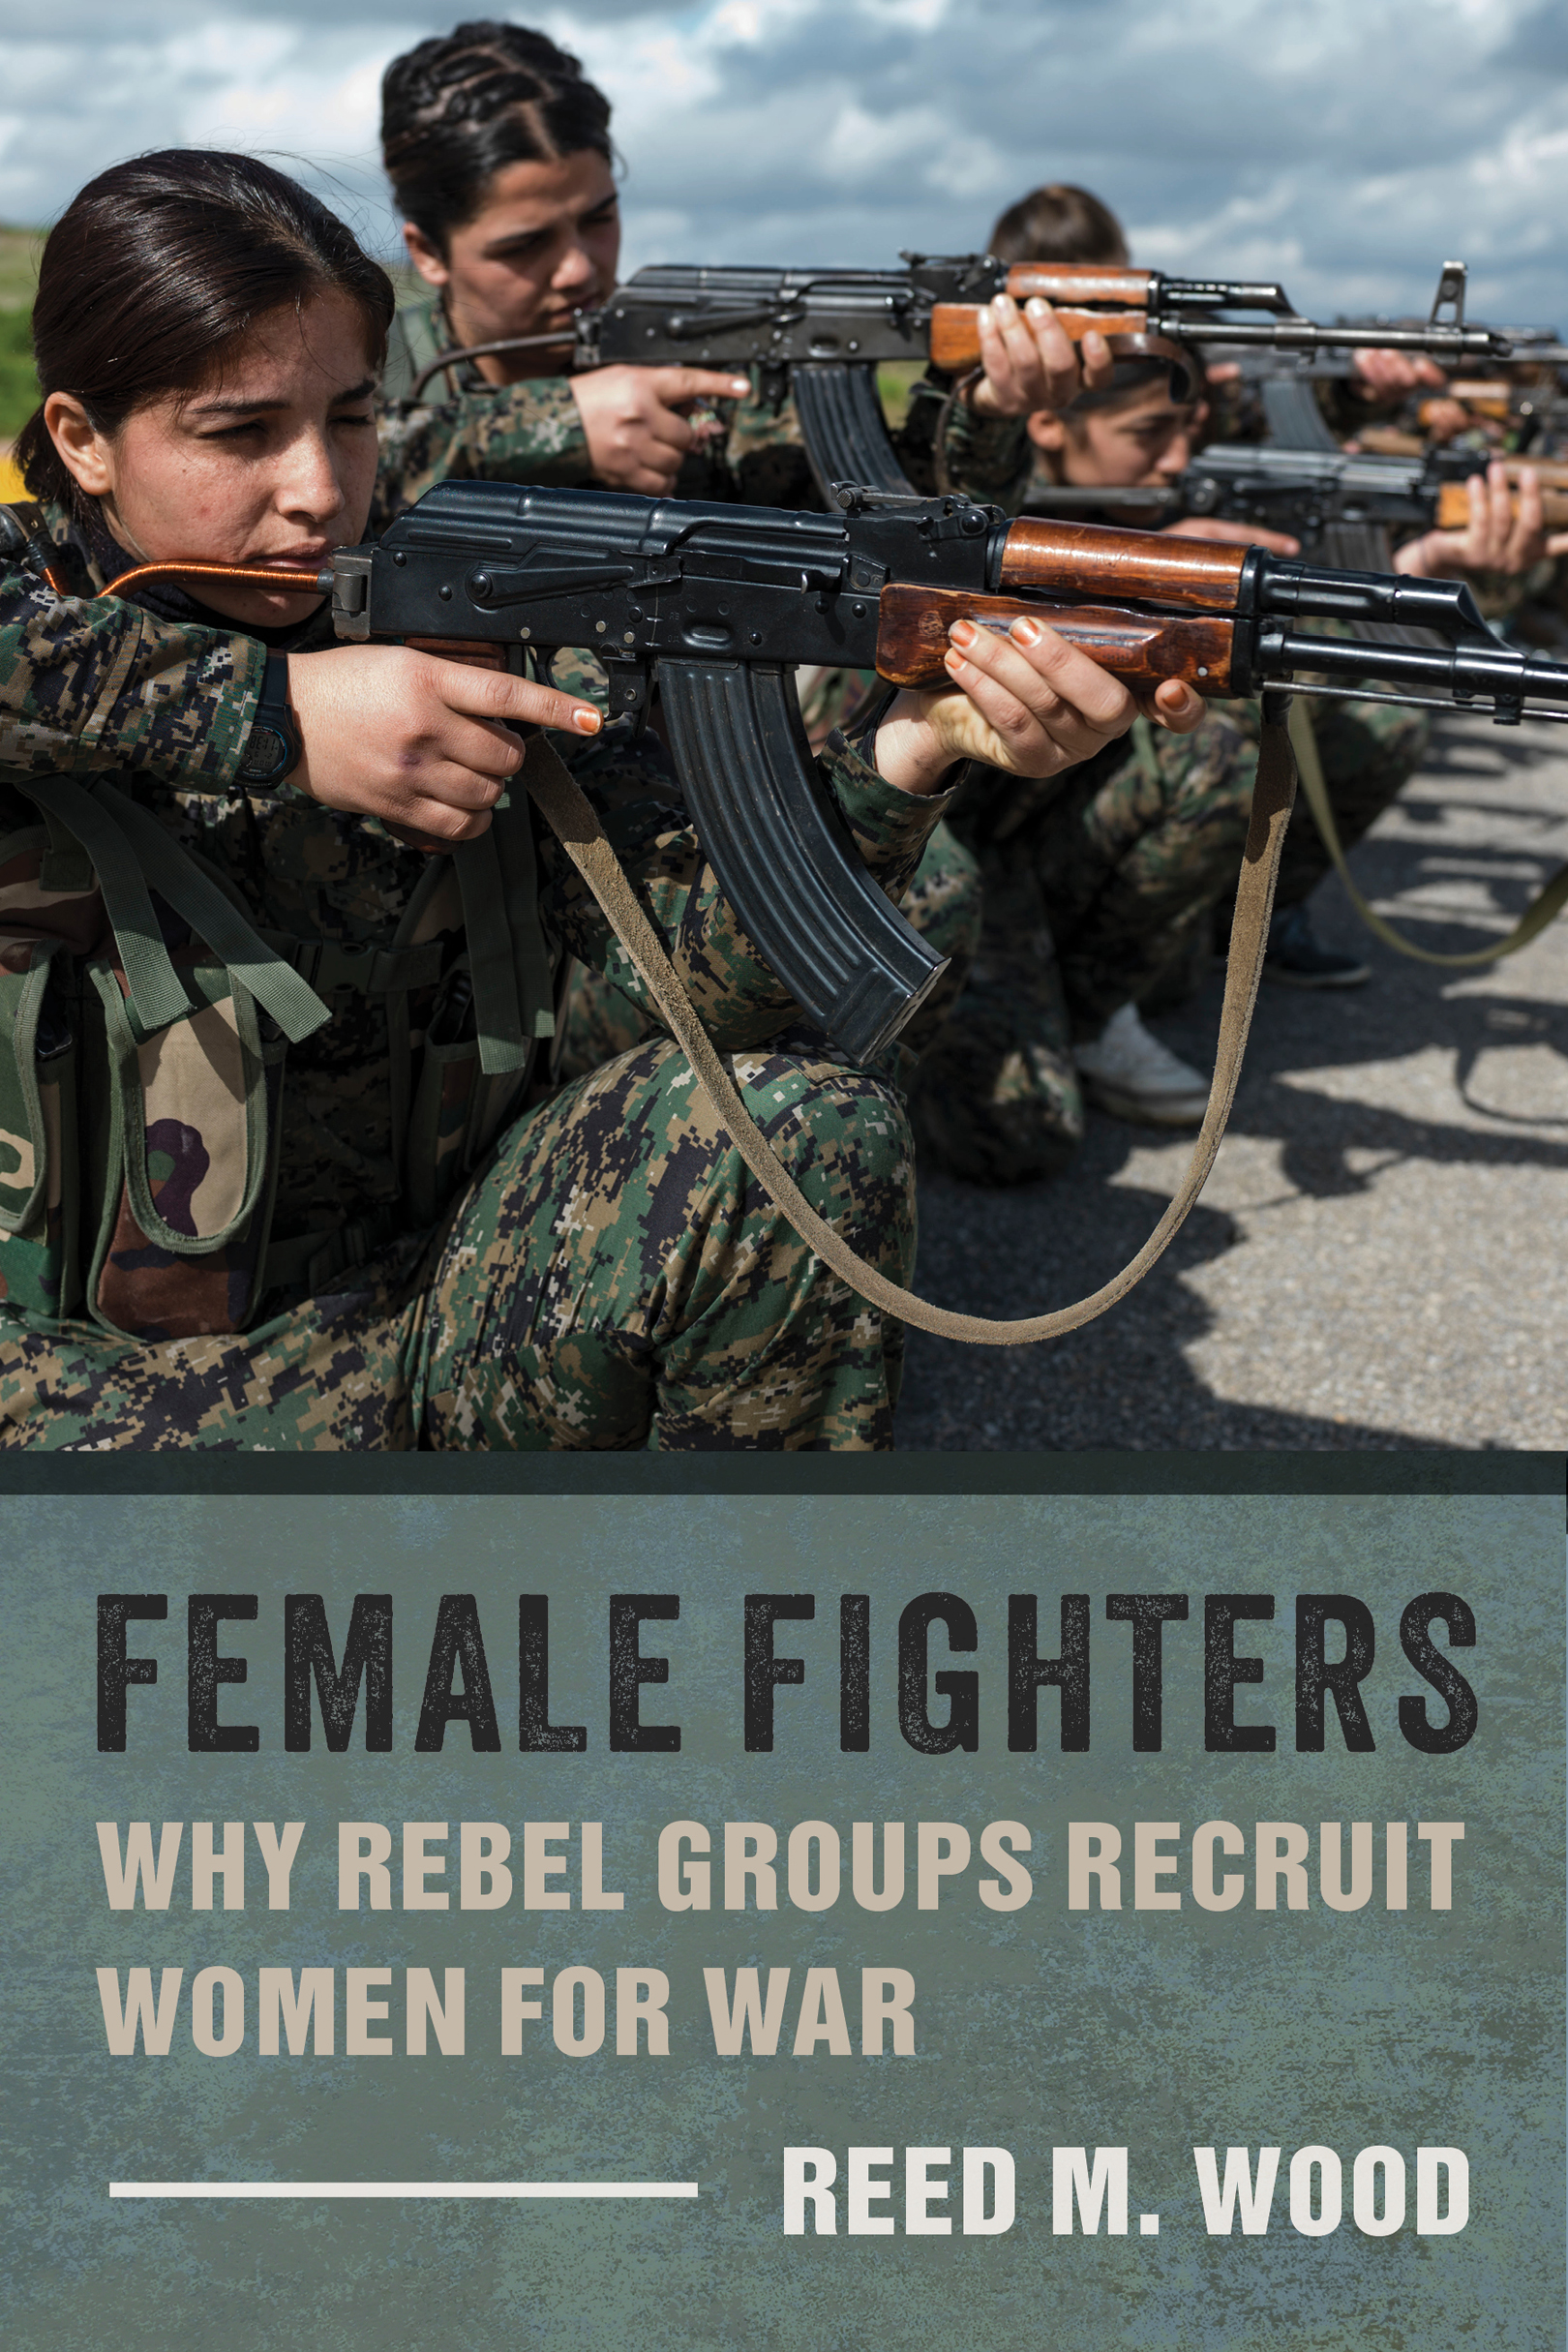 FEMALE FIGHTERS FEMALE FIGHTERS WHY REBEL GROUPS RECRUIT WOMEN FOR WAR Reed M - photo 1